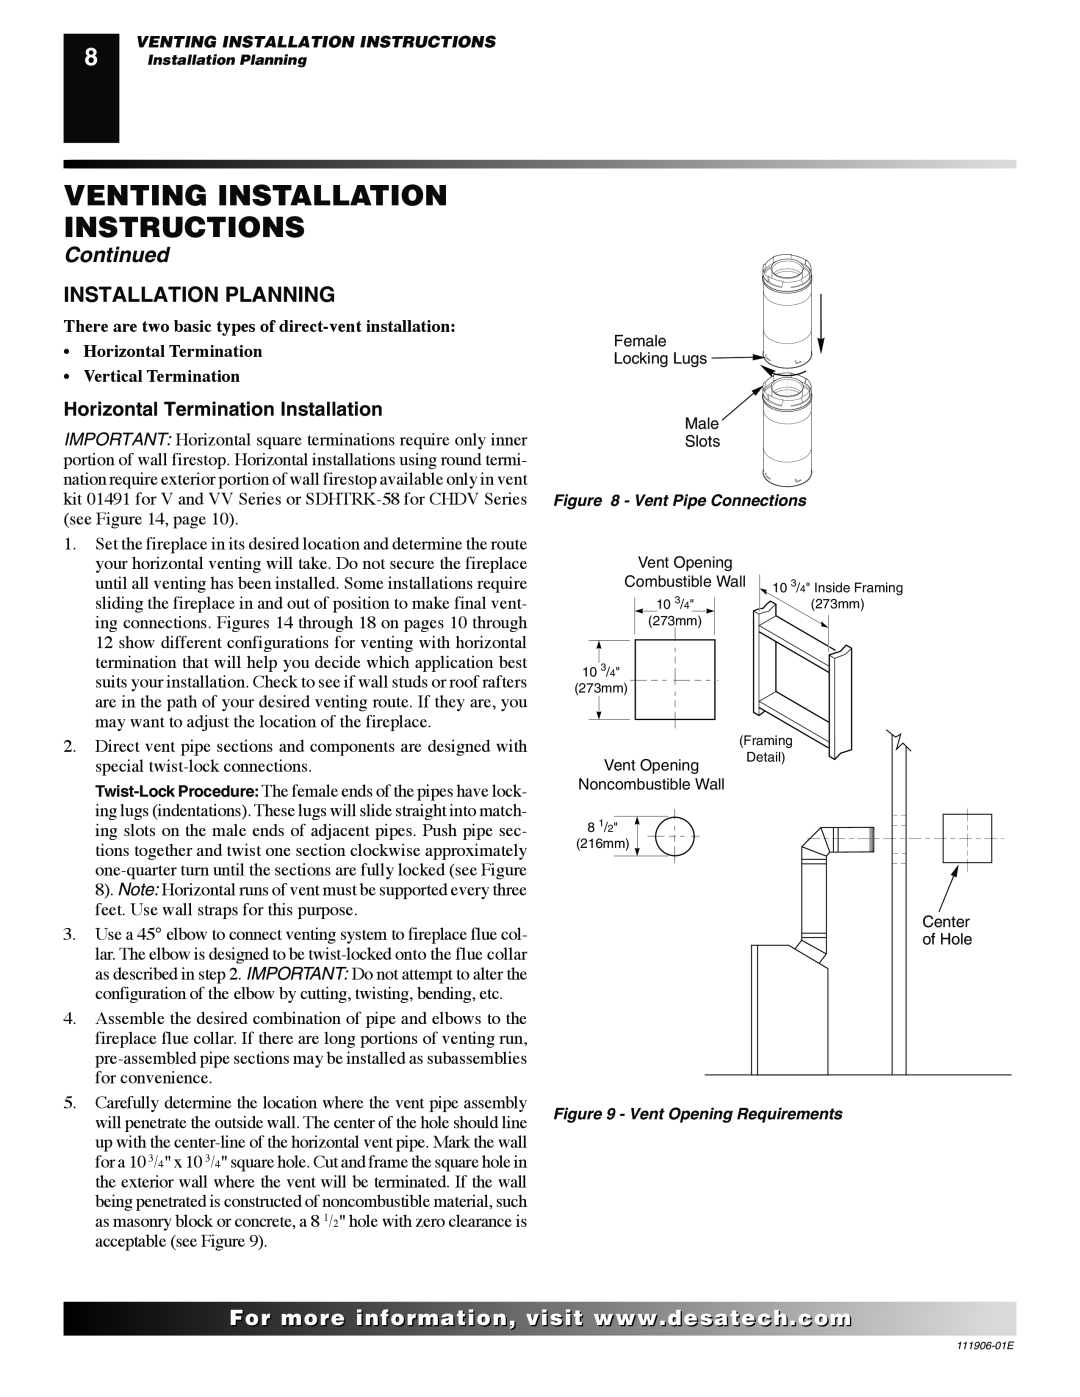 Desa VV42NB(1), CHDV42NR-B, V42P-A, V42N-A Installation Planning, Venting Installation Instructions, Continued, For..com 